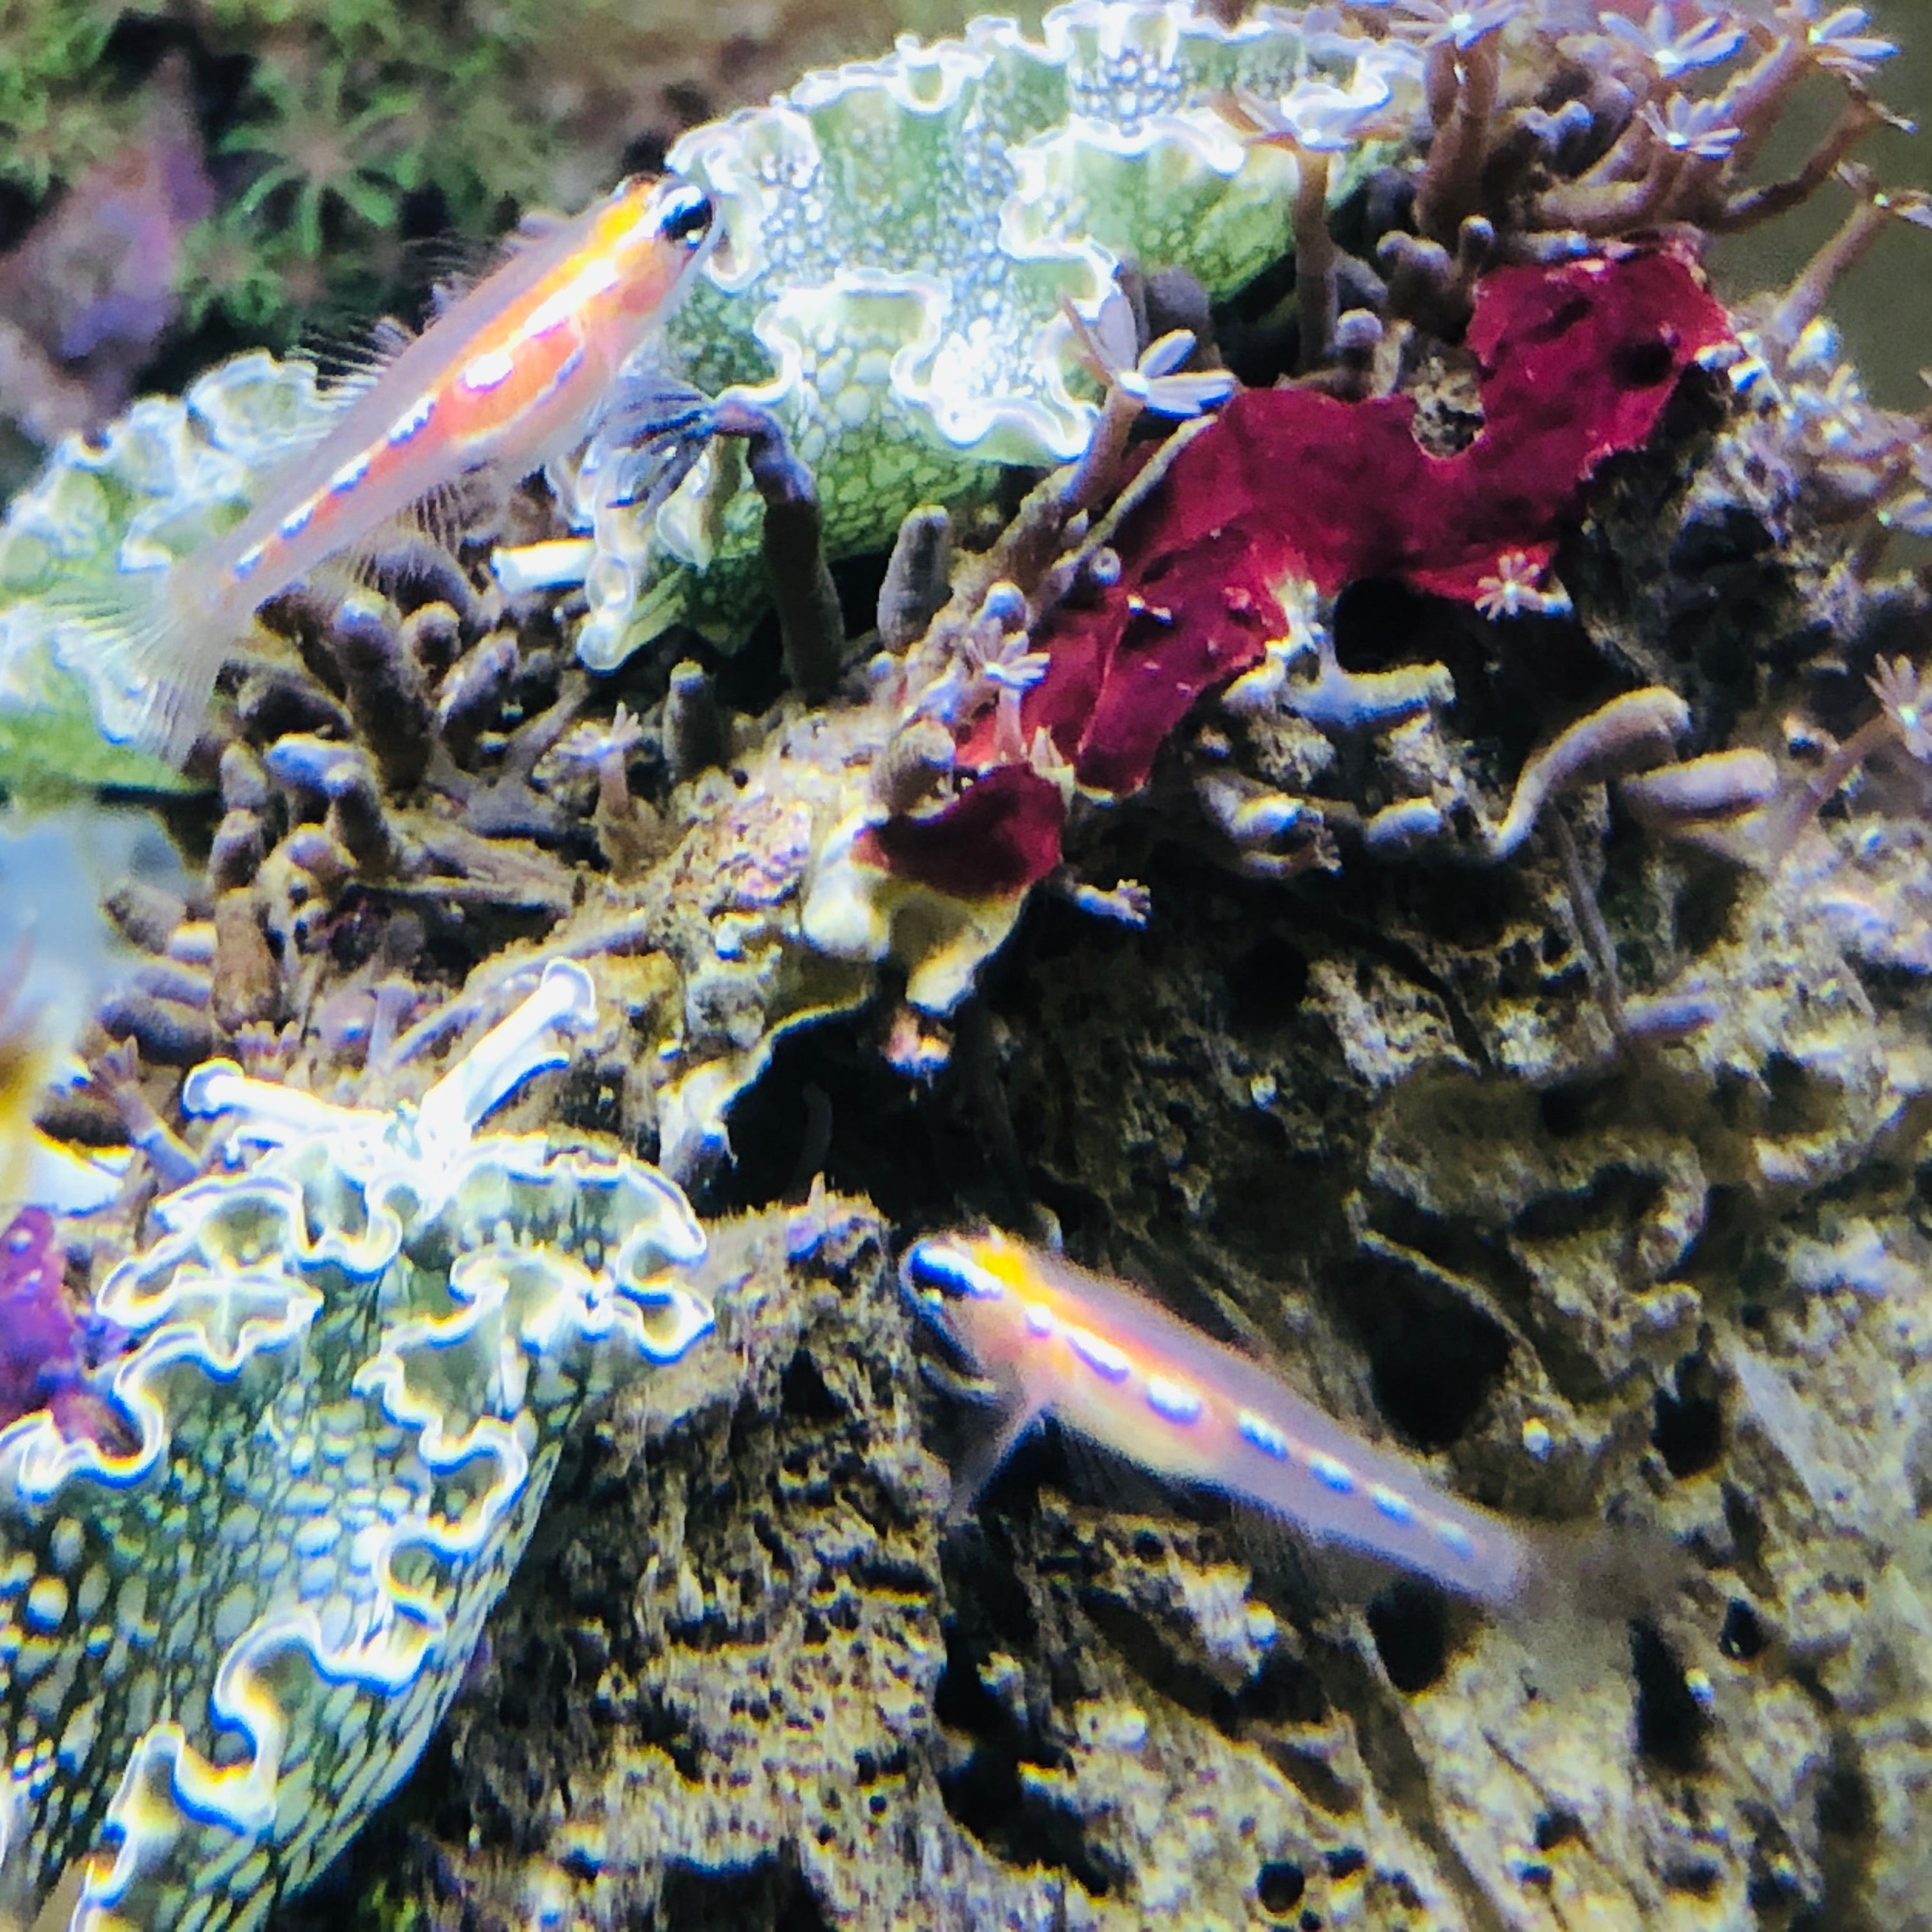 Aquarium Conditioned-Shoaling Masked Goby